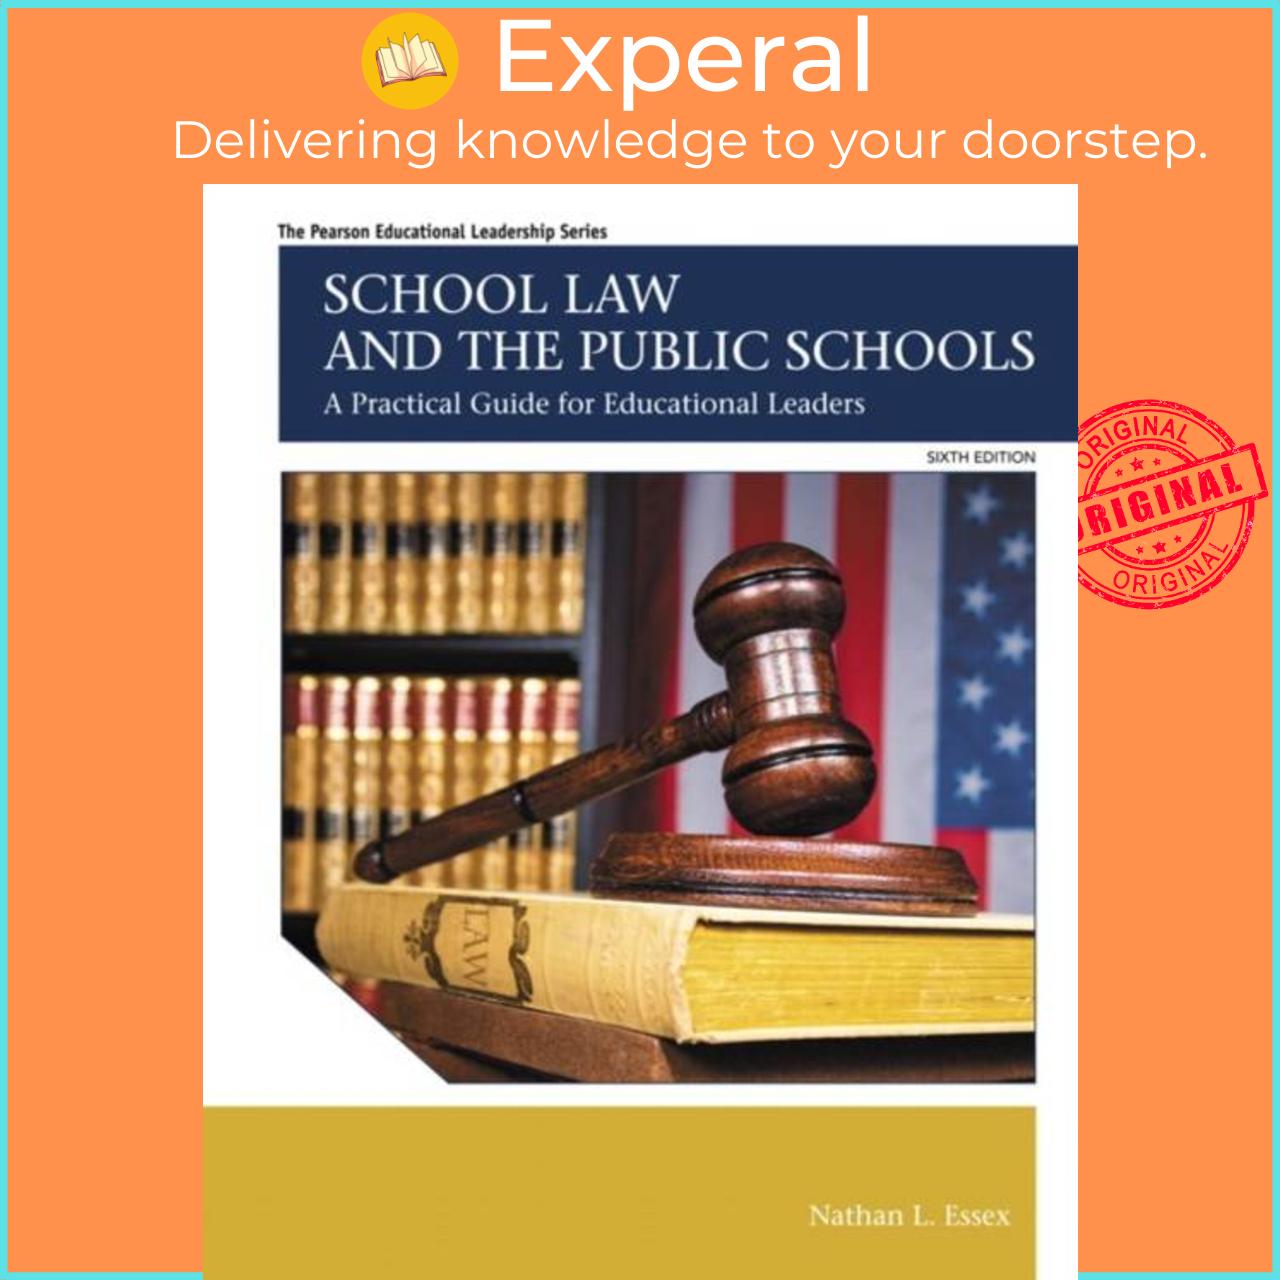 Sách - School Law and the Public Schools - A Practical Guide for Educational Lea by Nathan Es (UK edition, paperback)